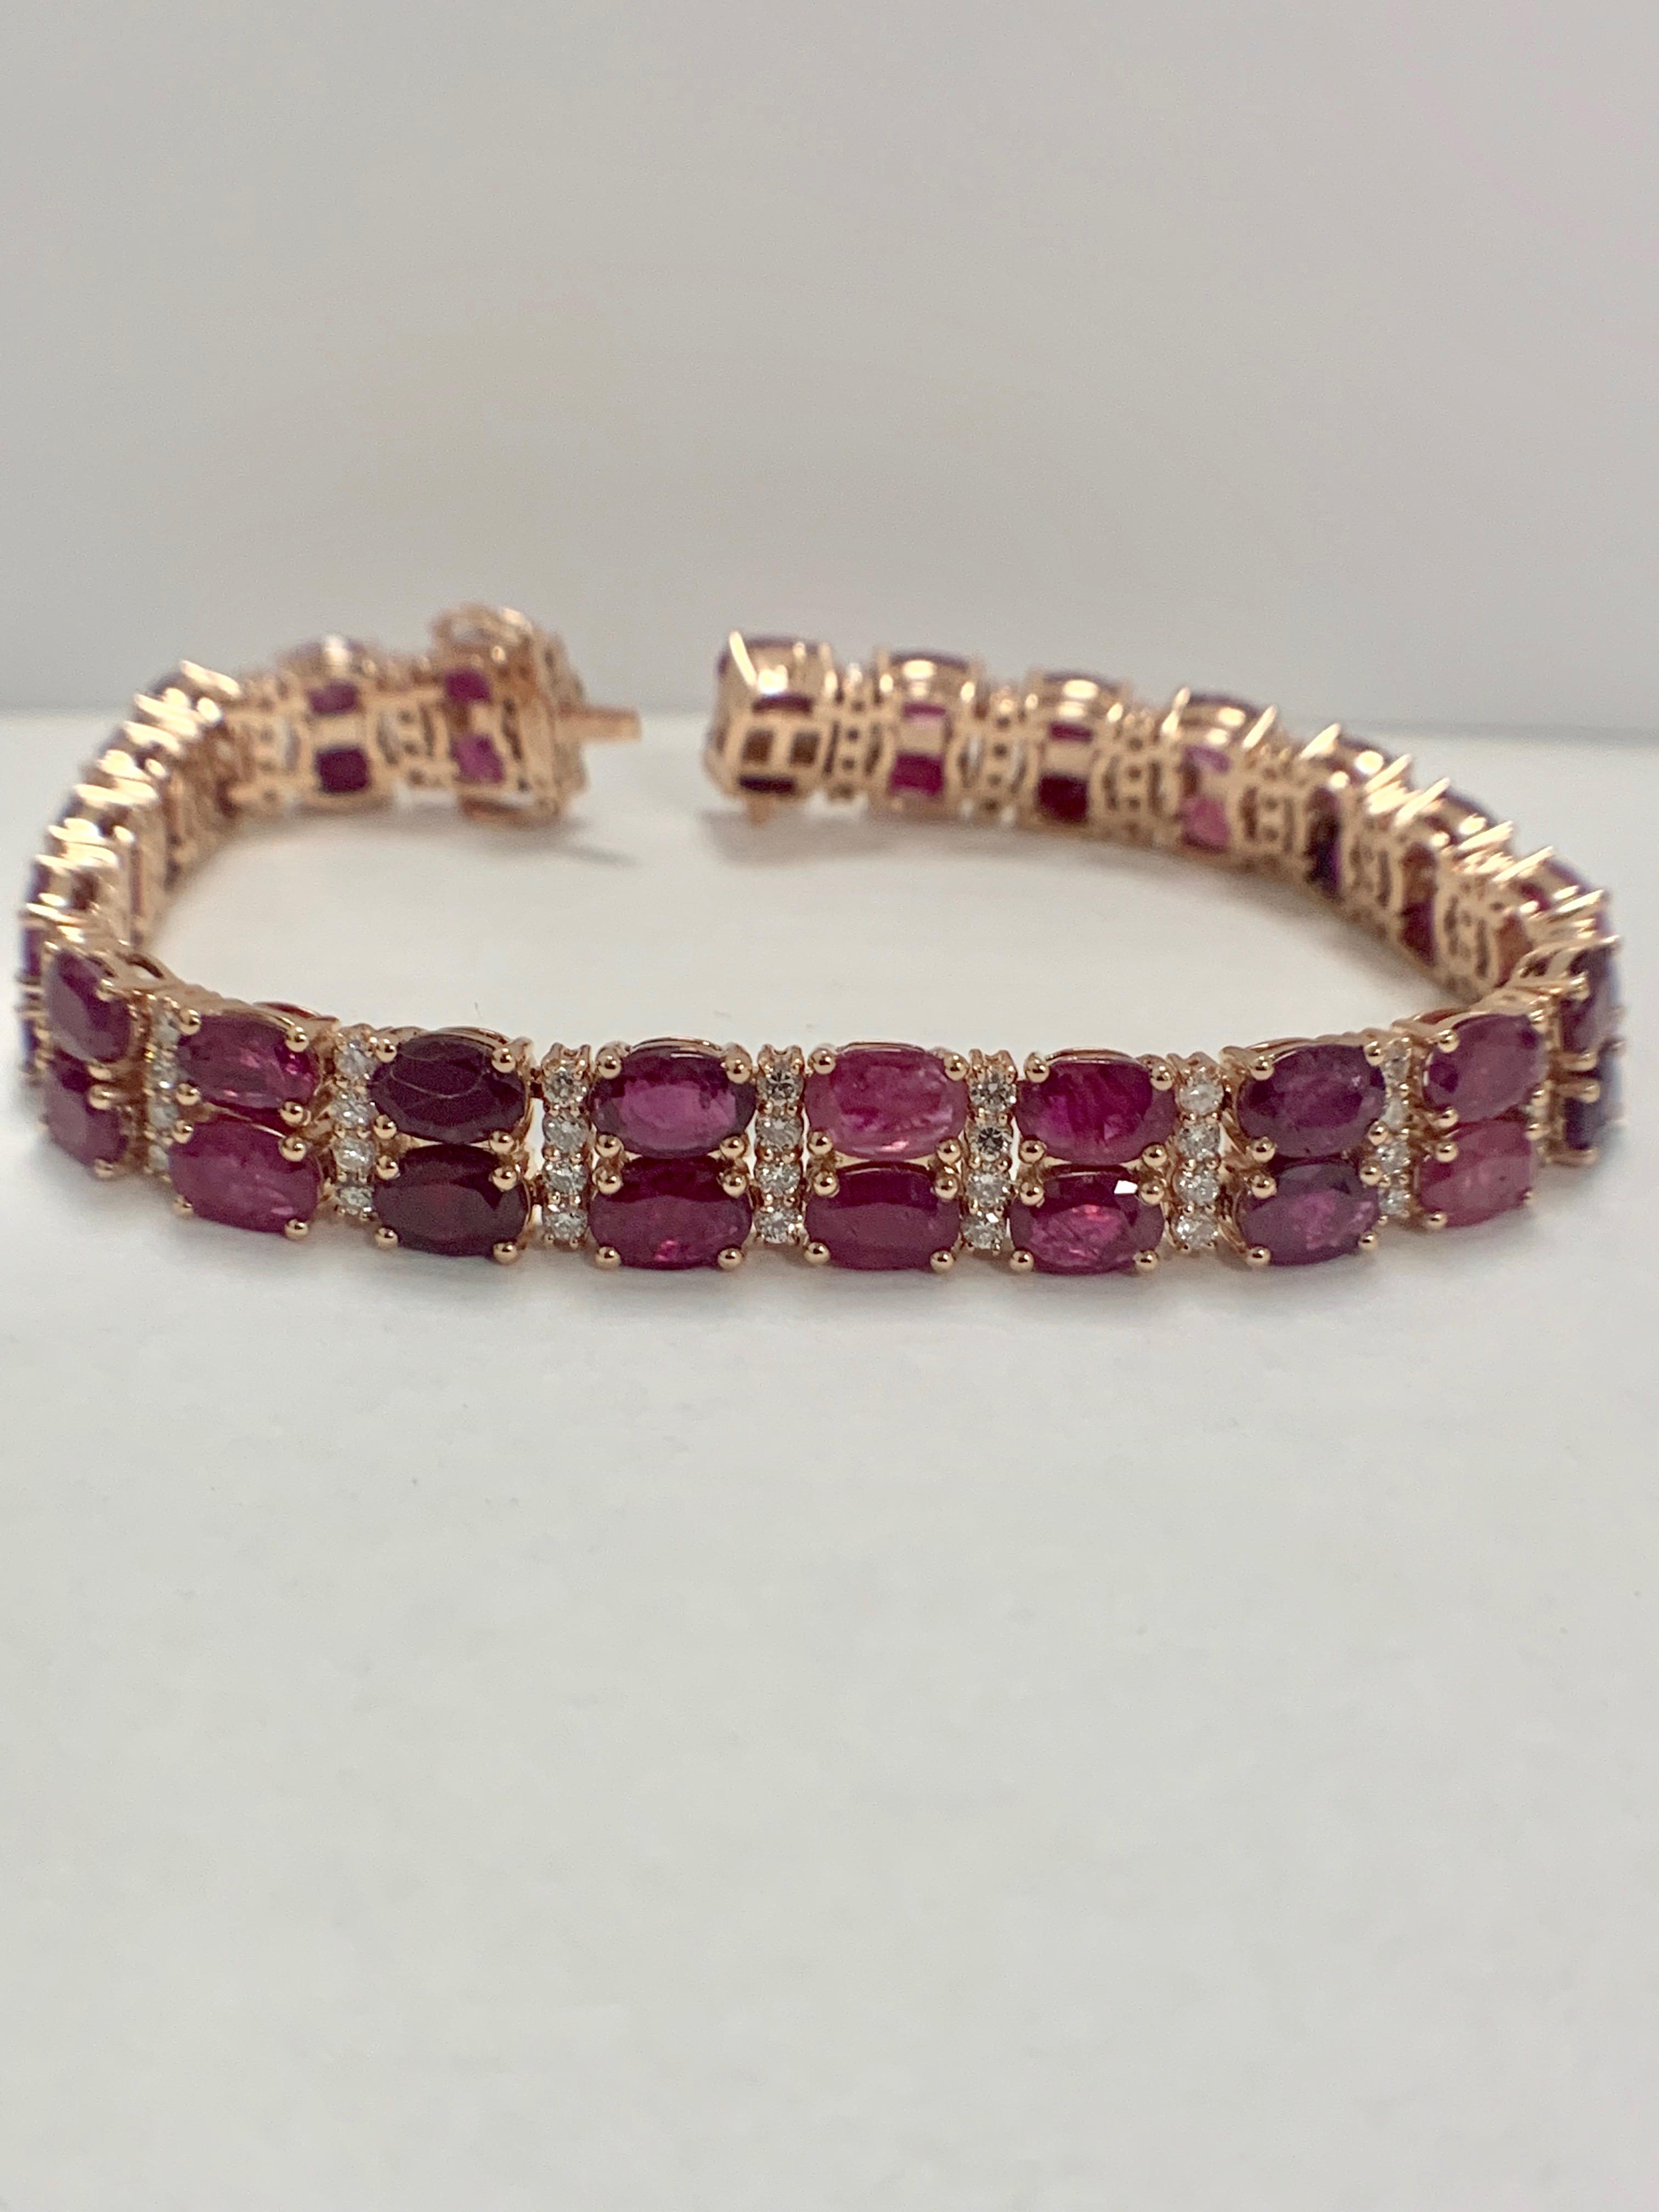 14ct Rose Gold Ruby and Diamond double row bracelet - Image 2 of 16